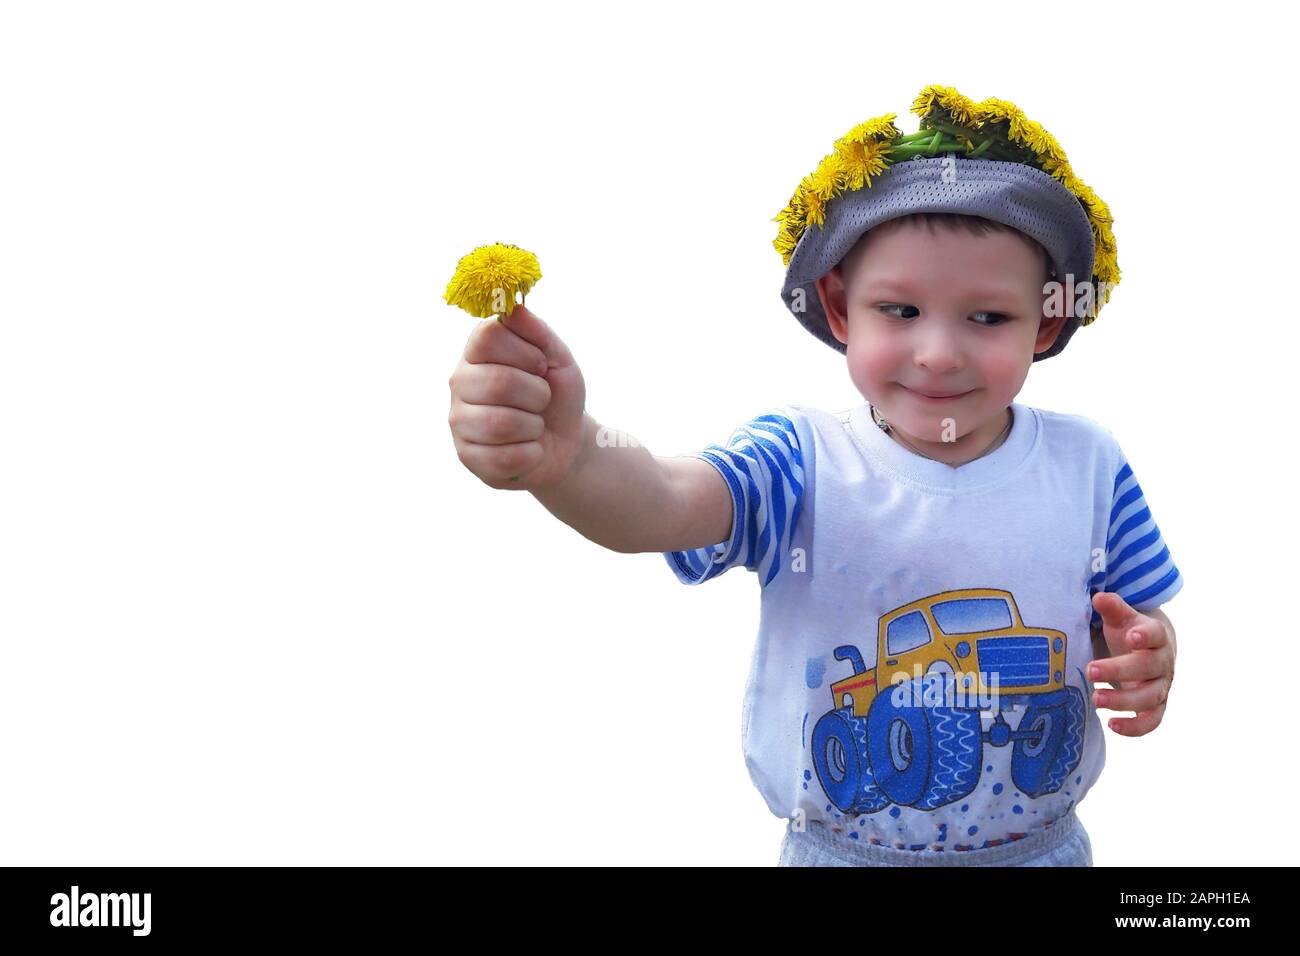 pictured in the photo boy with a wreath of dandelions on a whithe background Stock Photo